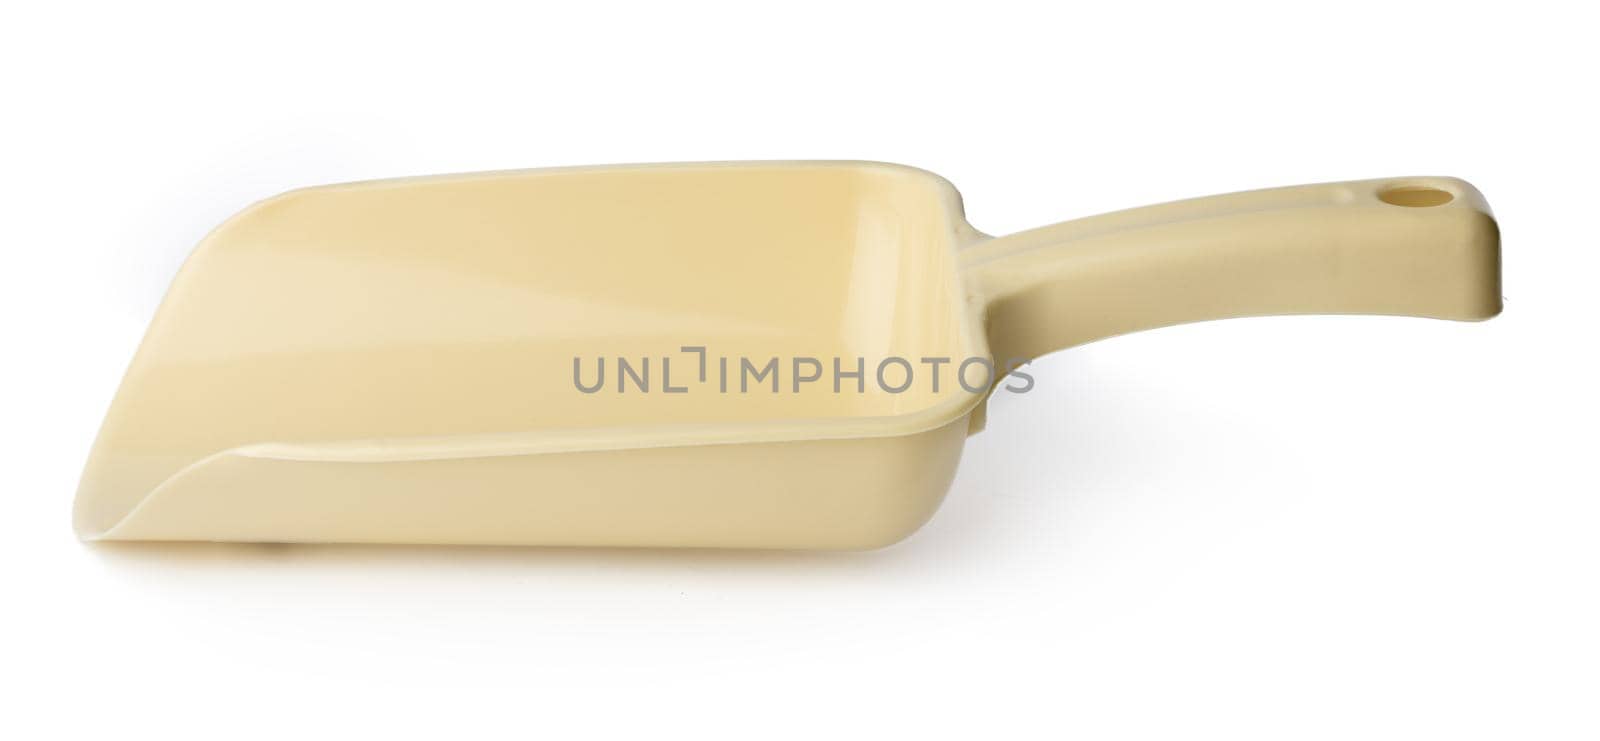 New plastic household scoop isolated on white by Fabrikasimf